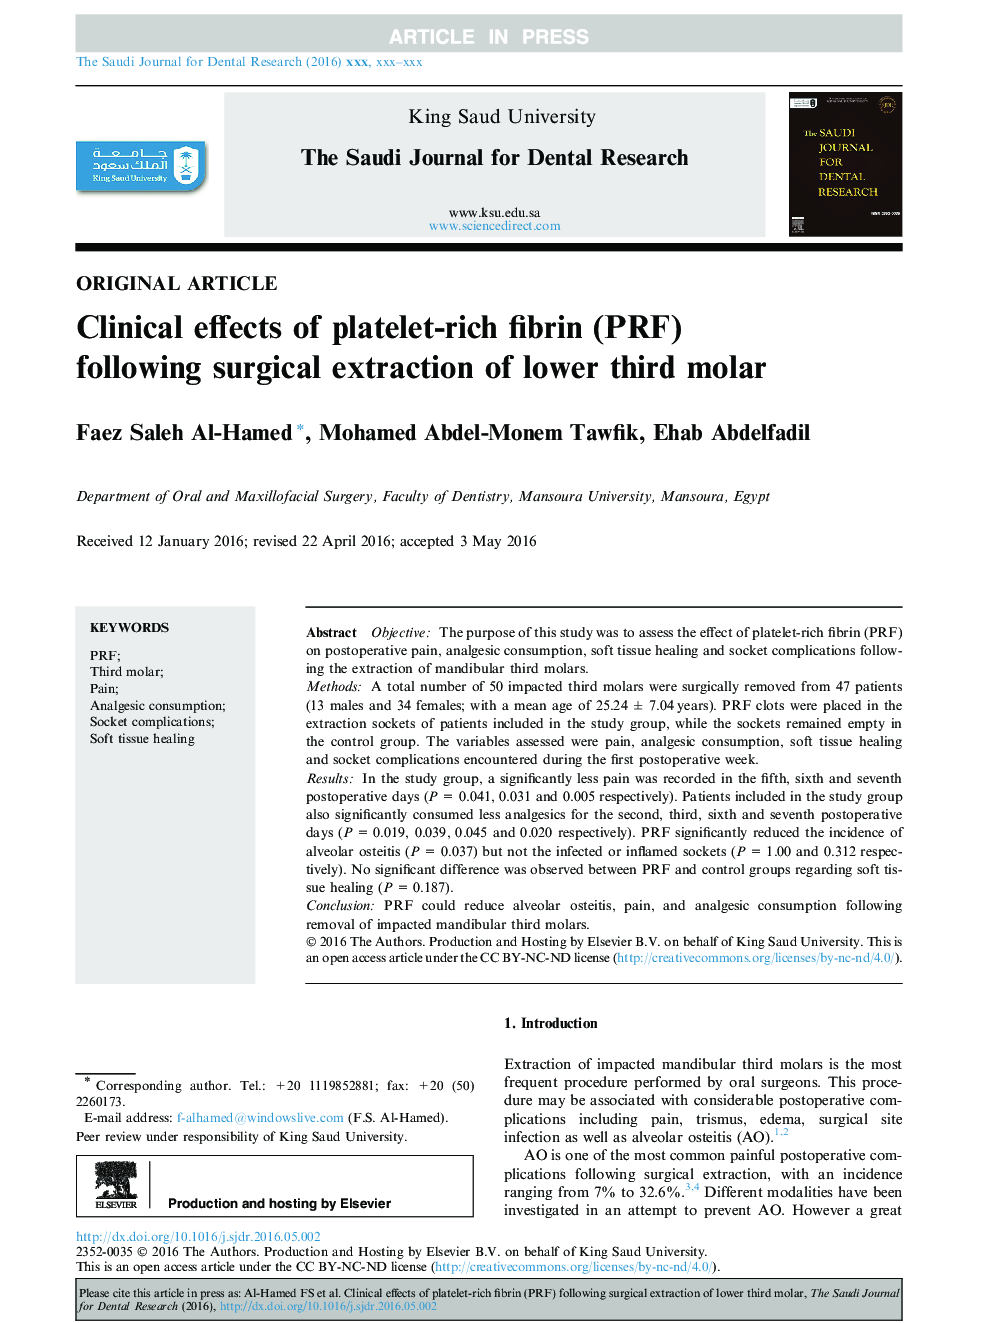 Clinical effects of platelet-rich fibrin (PRF) following surgical extraction of lower third molar